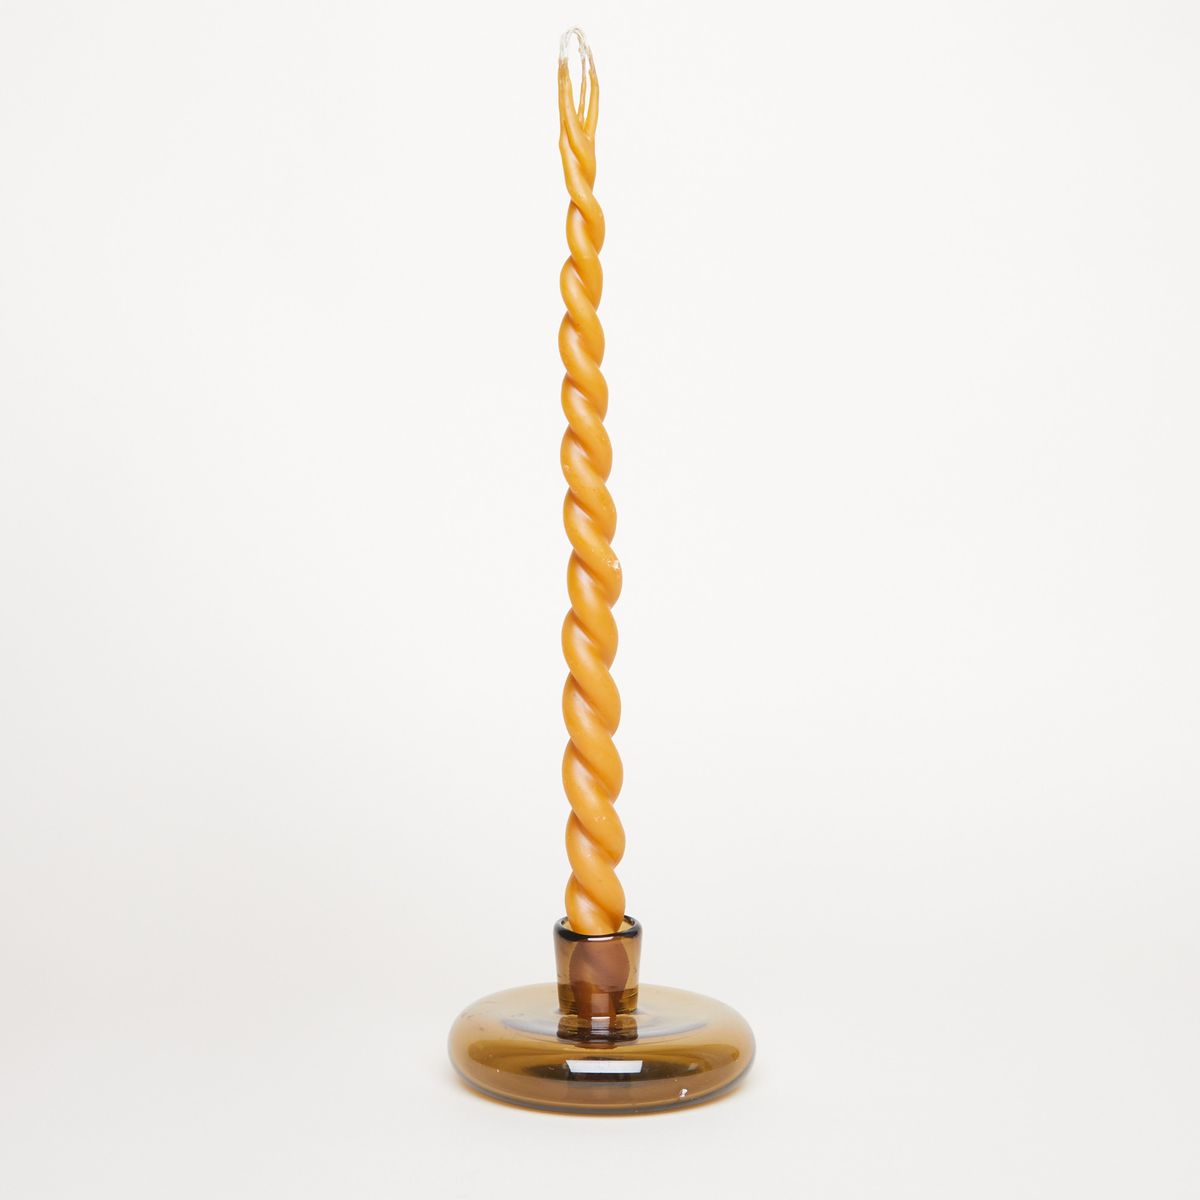 A brown glass candle holder holds a tall yellow candle that is made of two lengths of wax, twisted together.